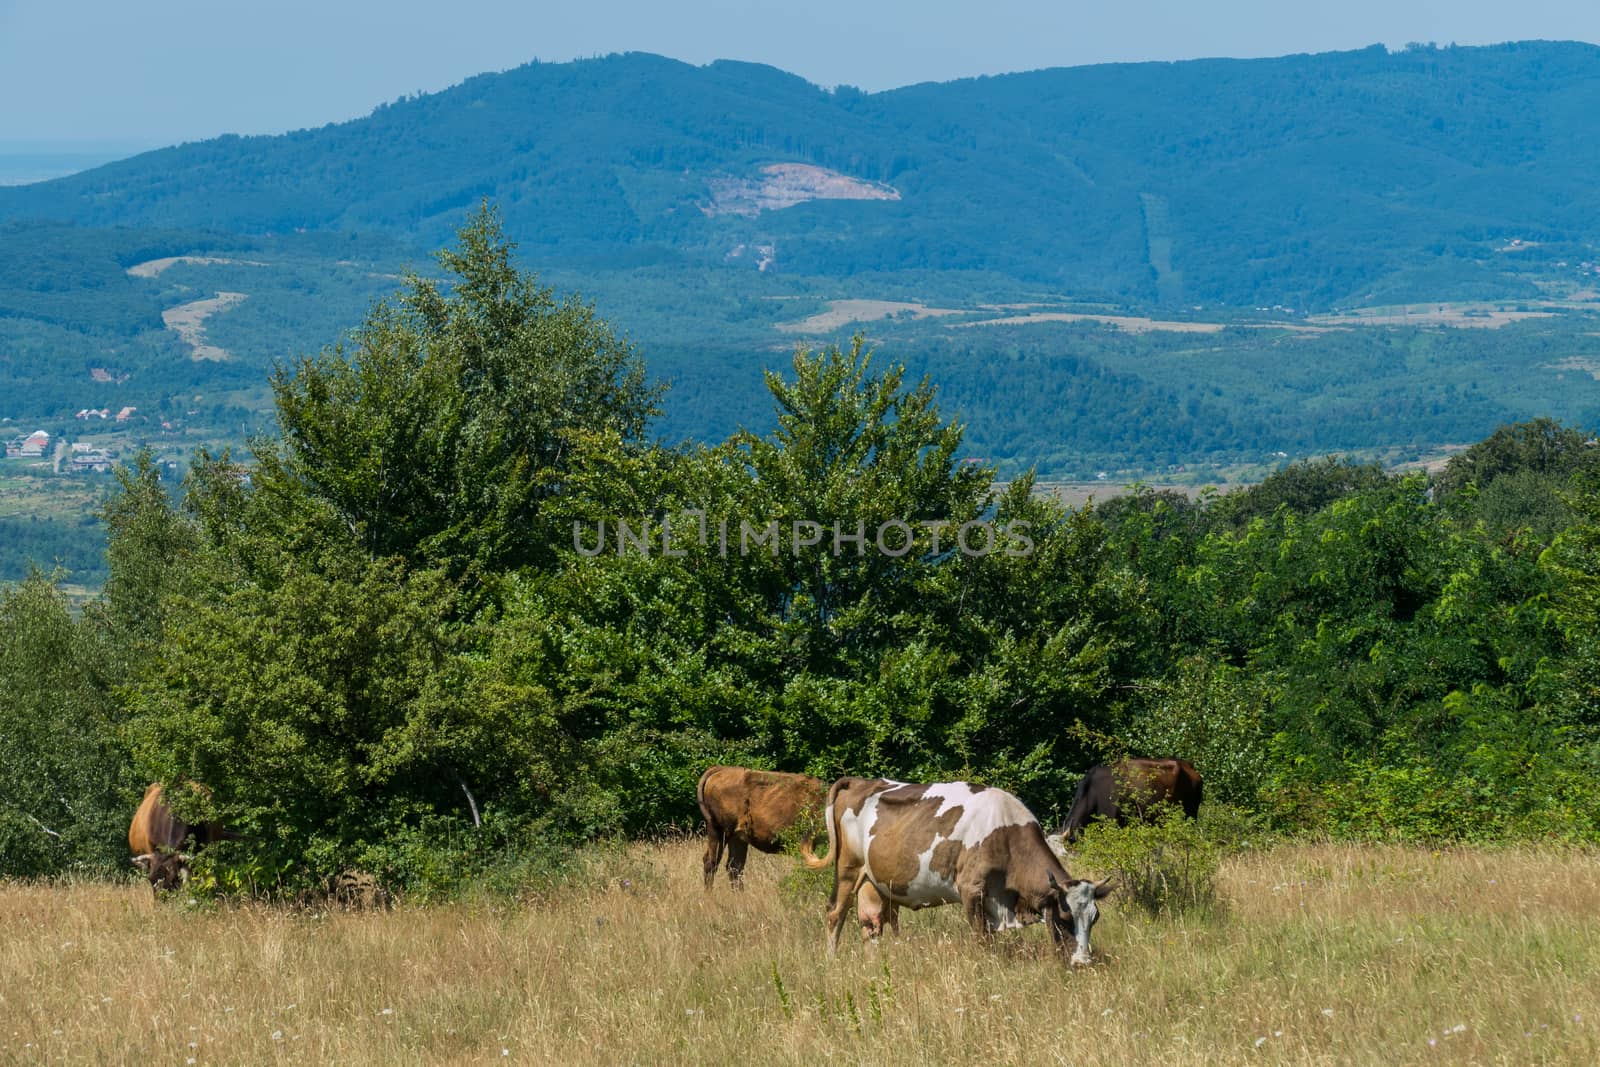 Homemade cows peacefully grazing in a meadow with burnt grass next to trees against the backdrop of mountain slopes.